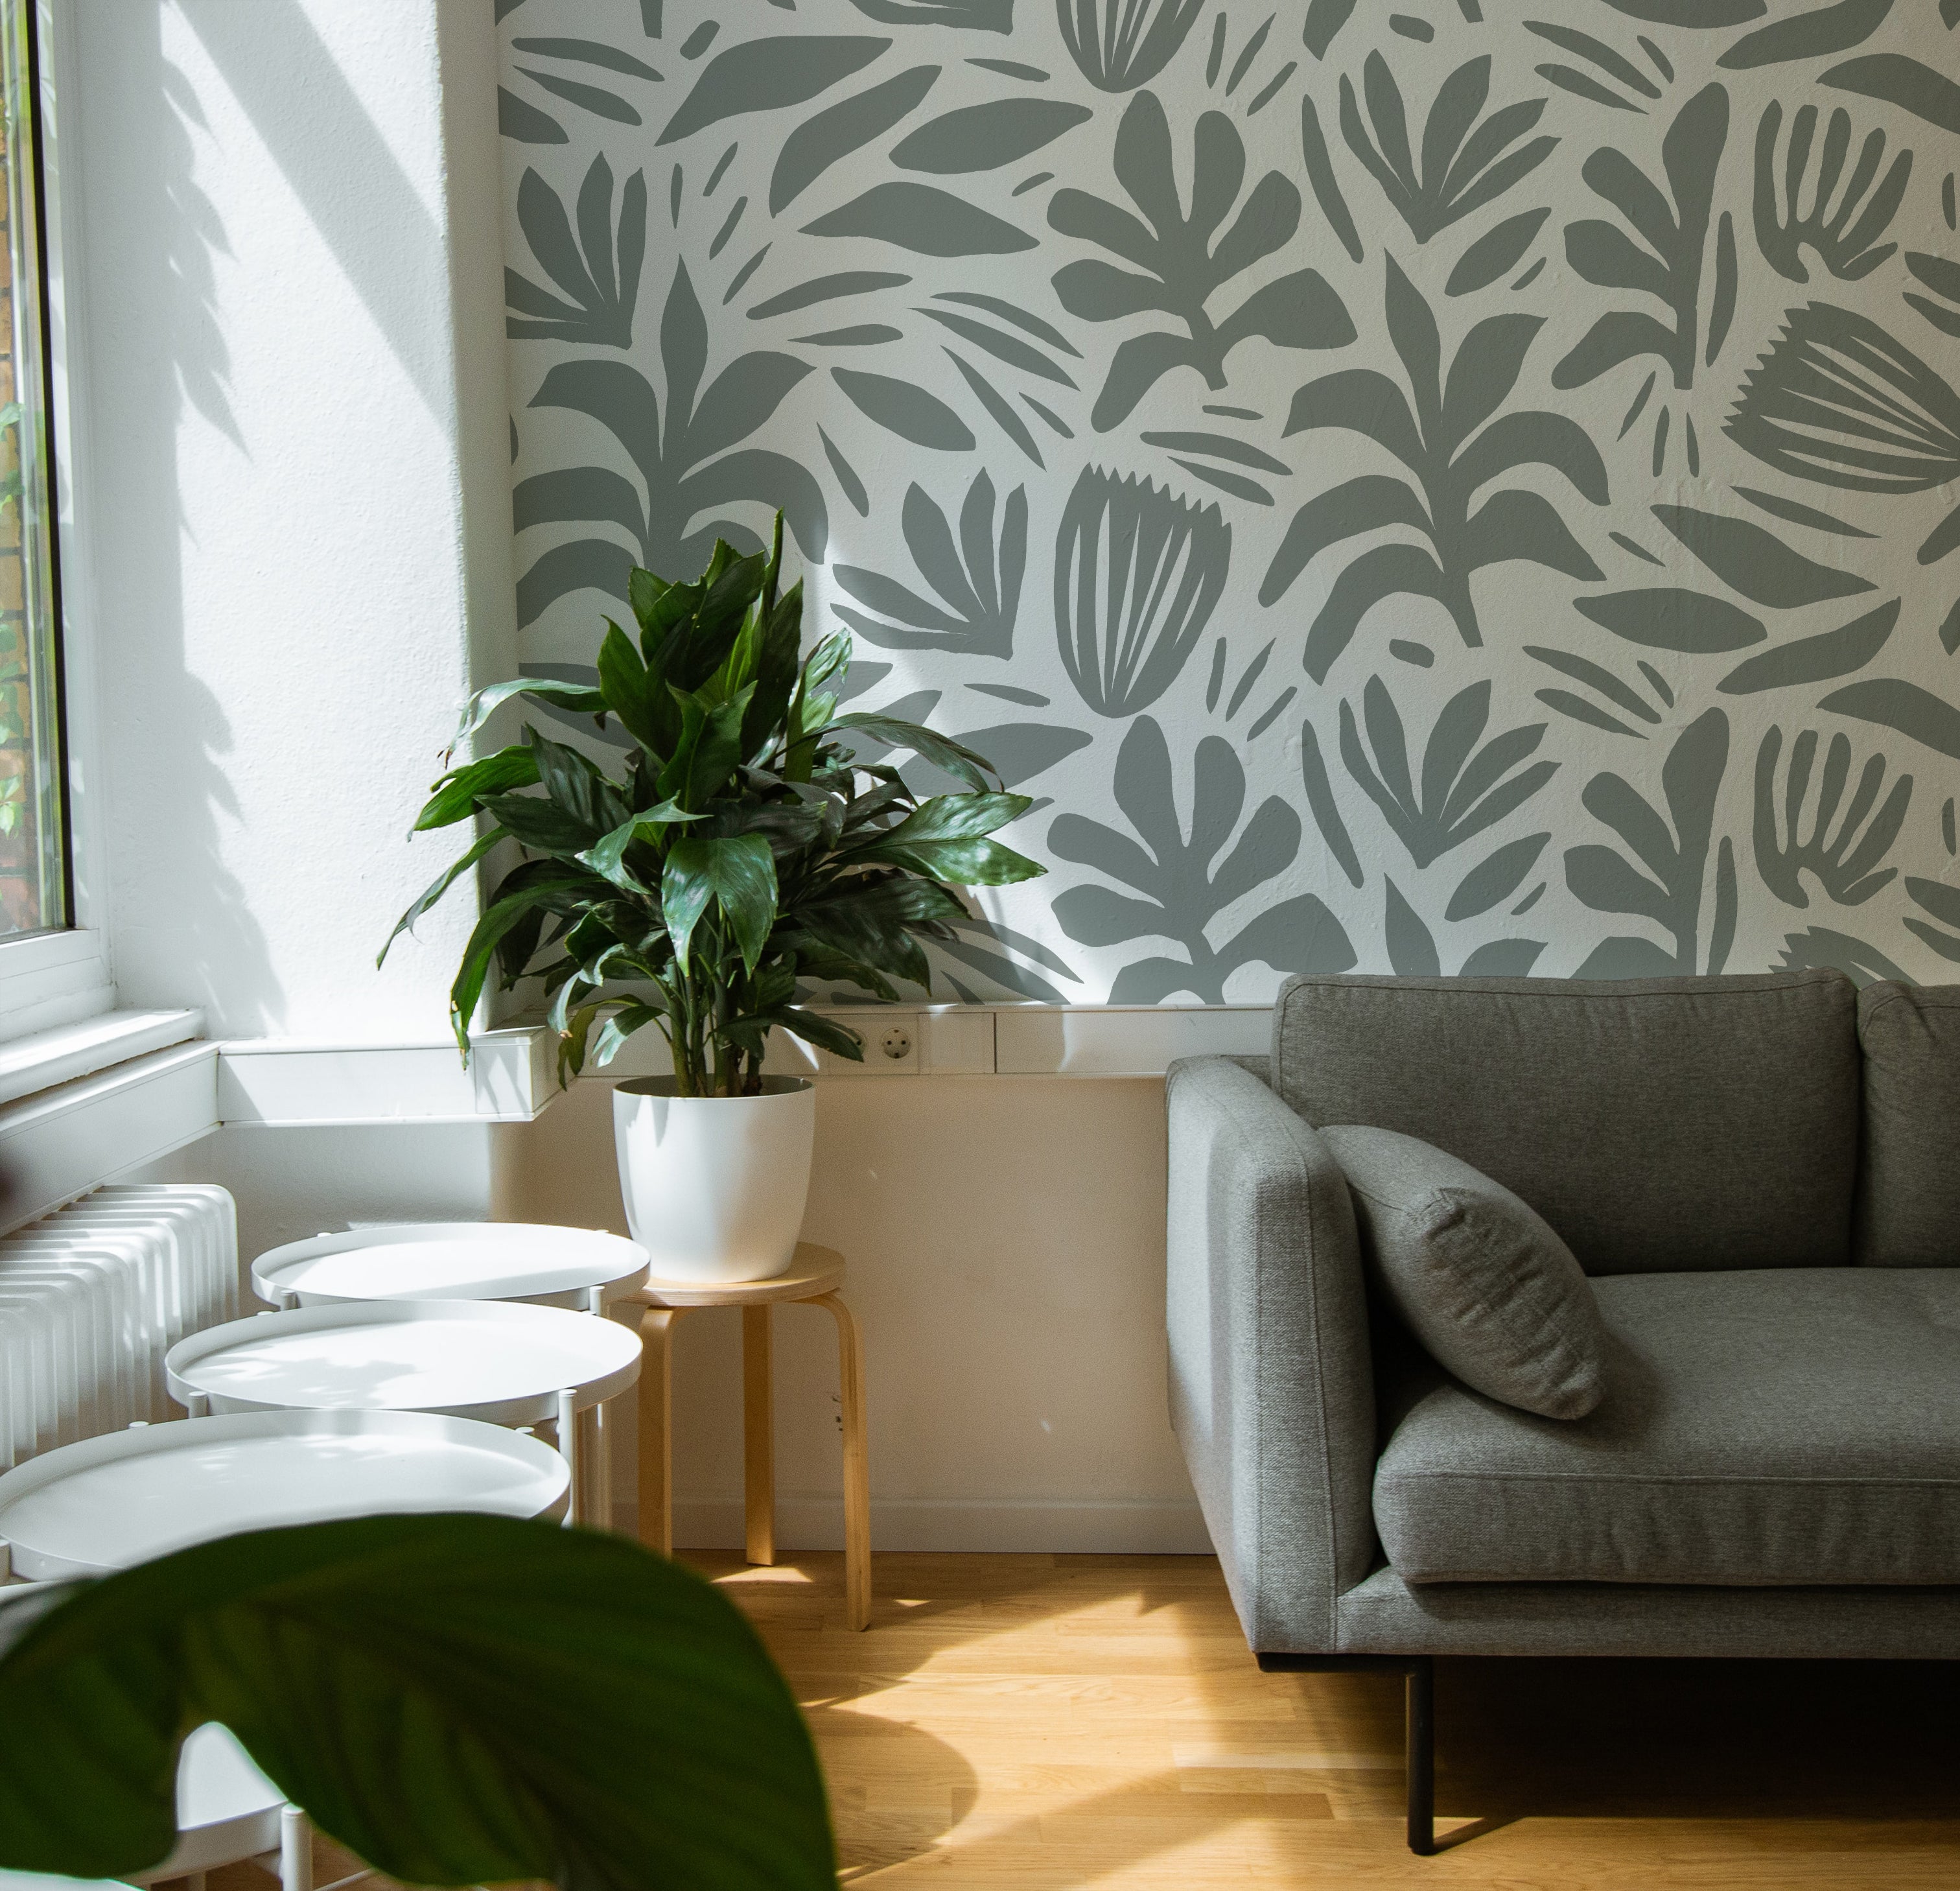 A modern living room enhanced by the Night Train Abstract Floral Wallpaper, adding a touch of elegance with its abstract floral design in gray tones. The room is complemented by a contemporary gray sofa and a vibrant green houseplant.